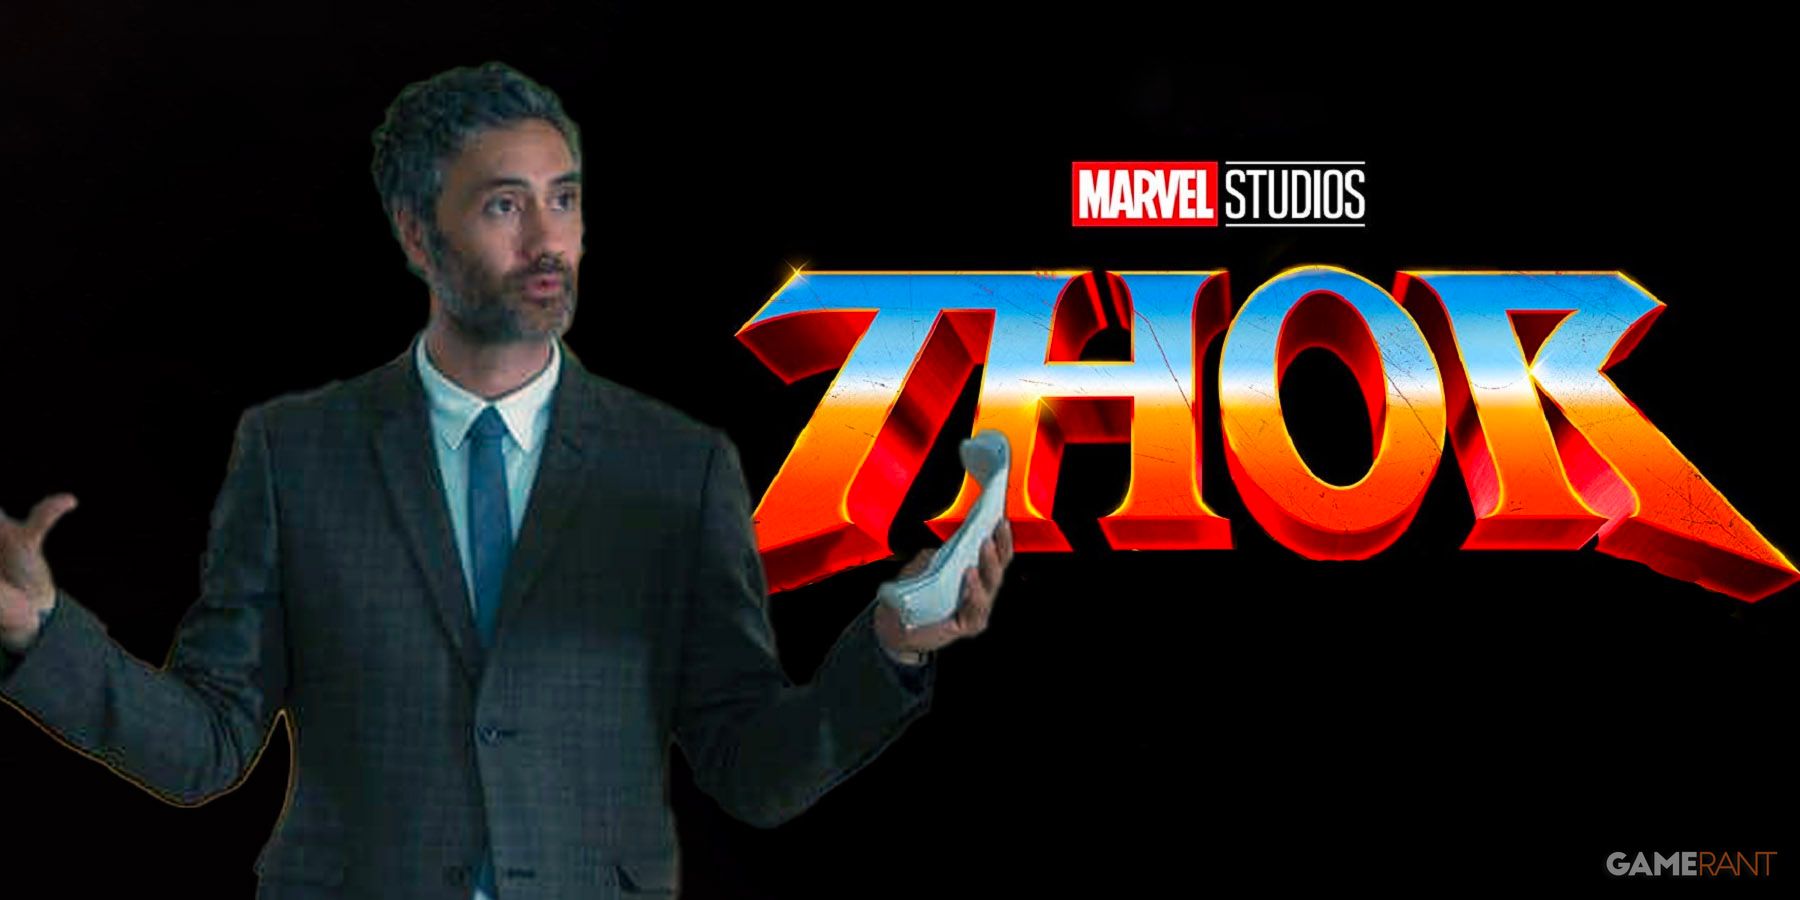 Thor Director Taika Waititi Reacts To Franchise Continuing Without Him